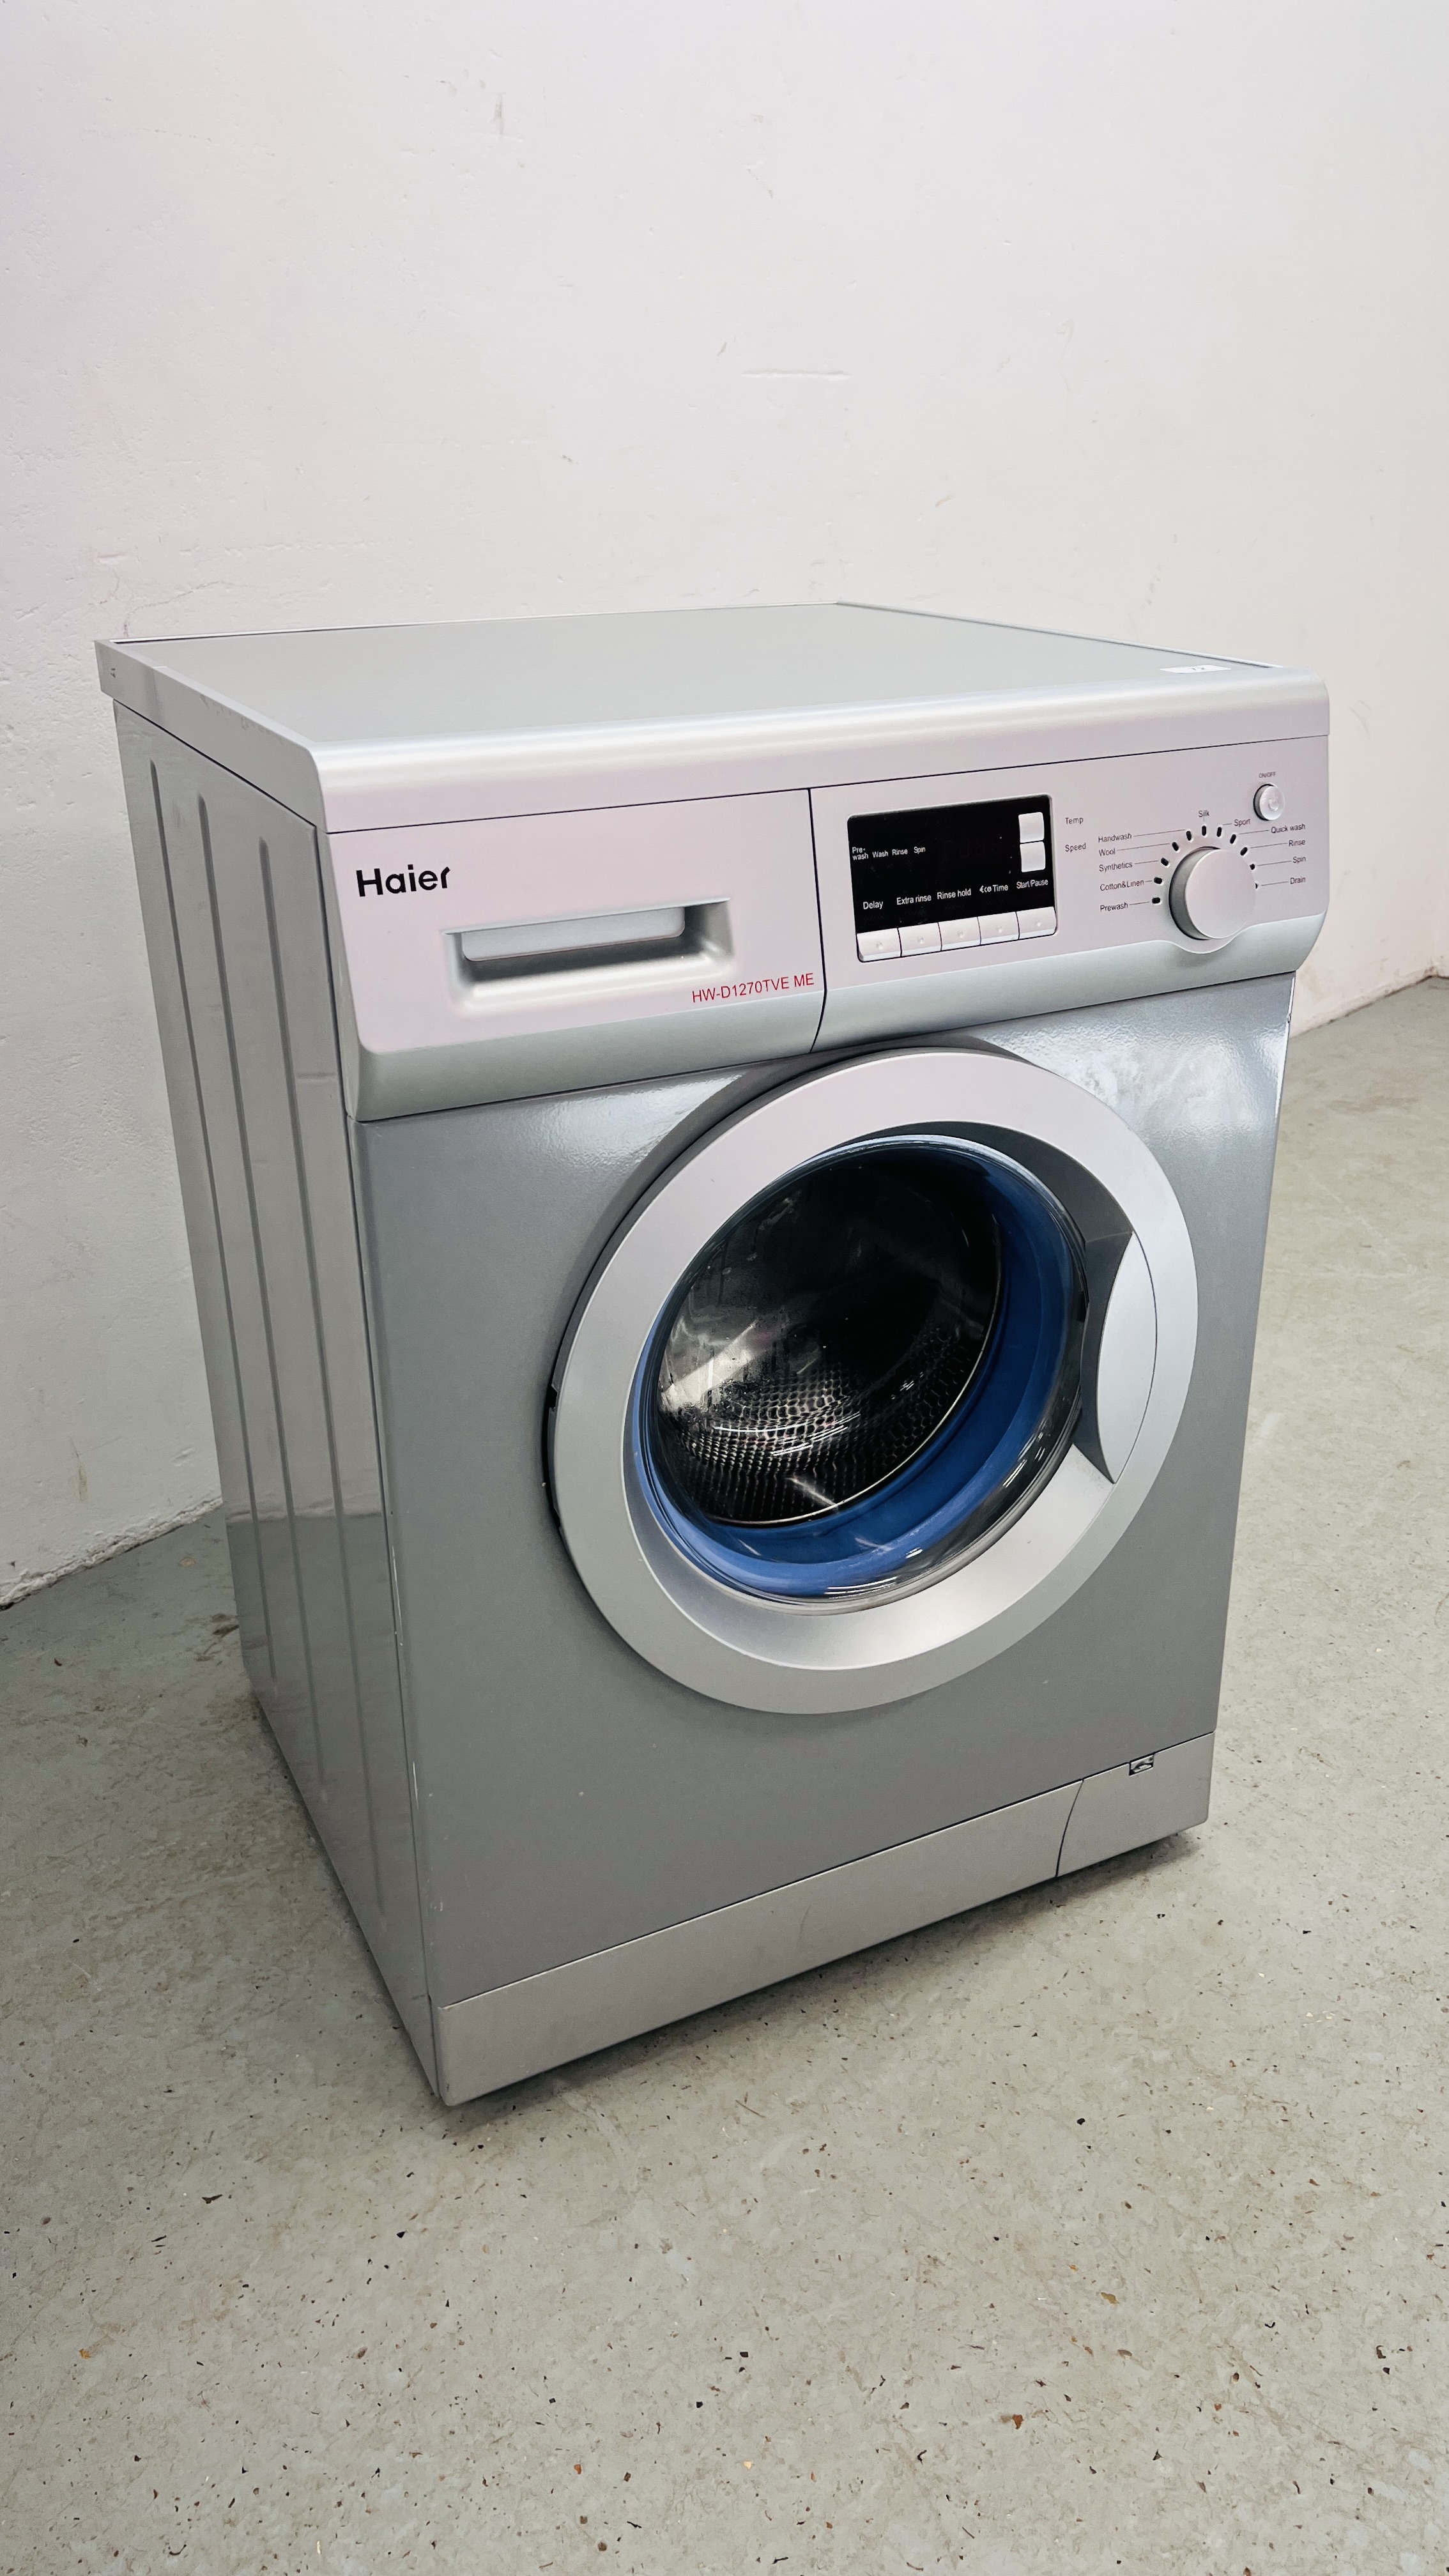 A HAIER SILVER FINISH WASHING MACHINE - SOLD AS SEEN. - Image 5 of 6